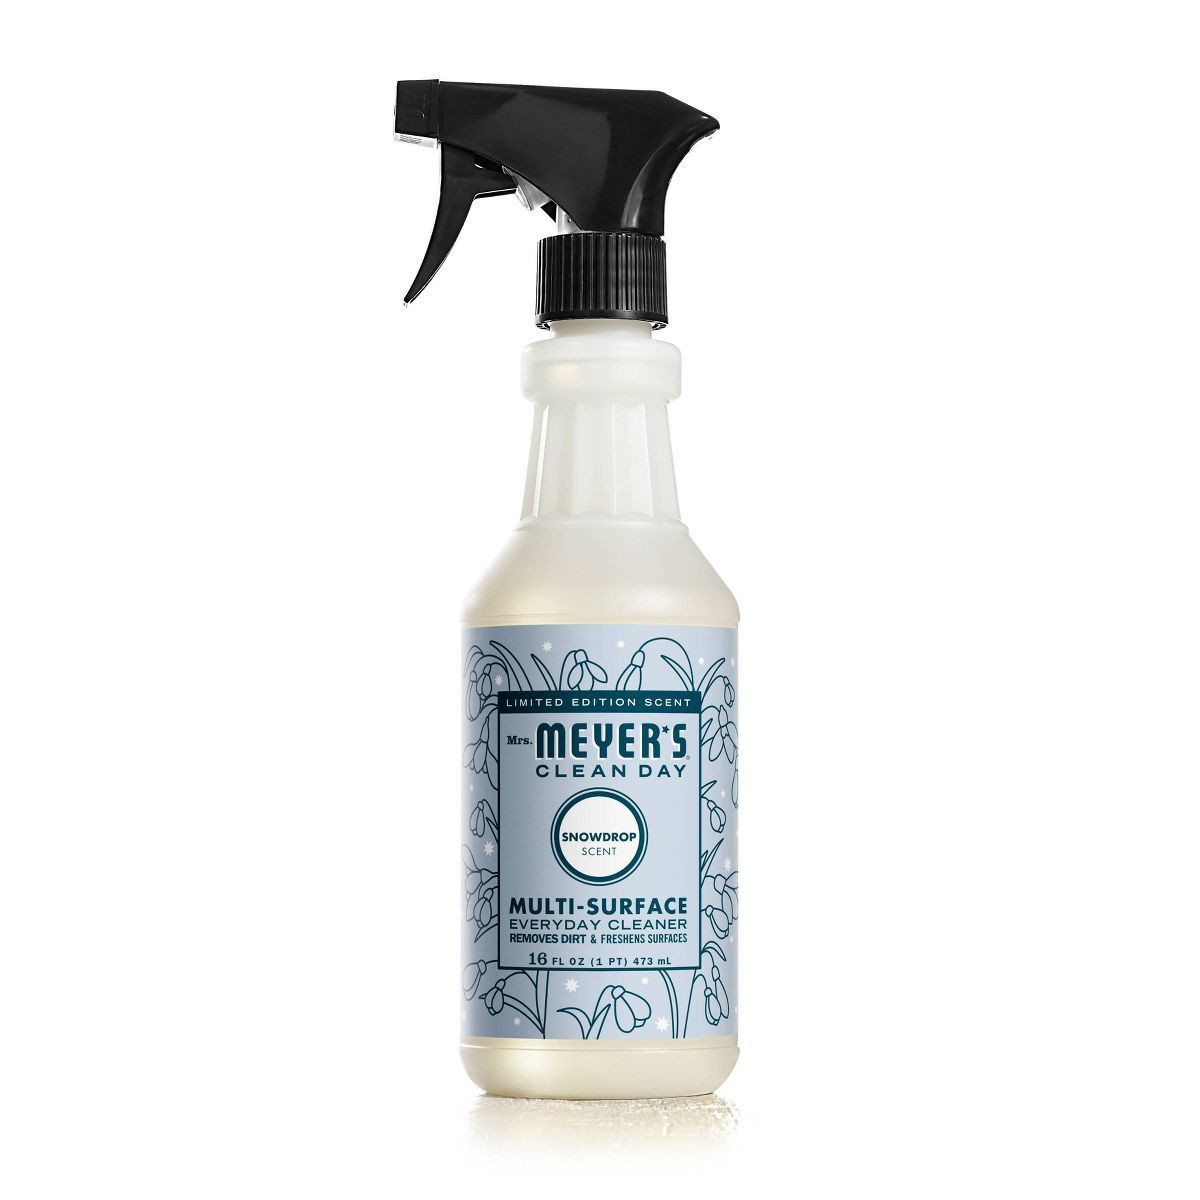 Mrs. Meyer's Clean Day Holiday Snowdrop All Purpose Cleaner - 16 fl oz | Target